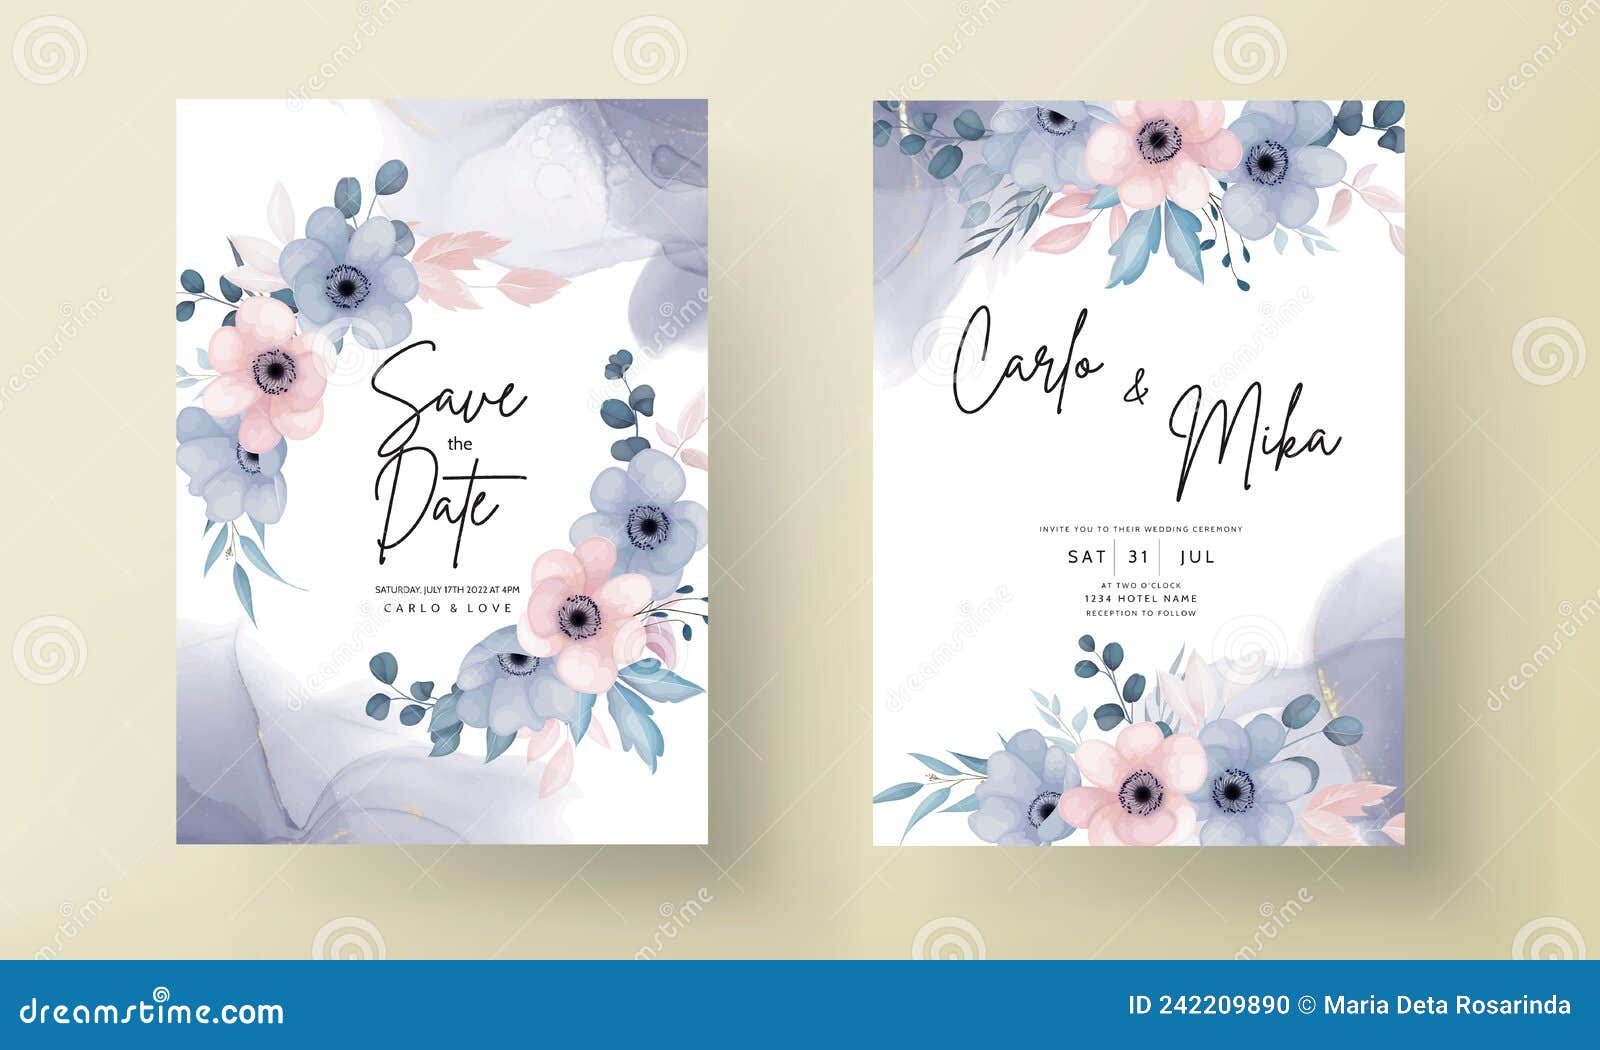 Marriage invitation card romantic, with drawing of leaf floral frame.  Vector - Stock Image - Everypixel